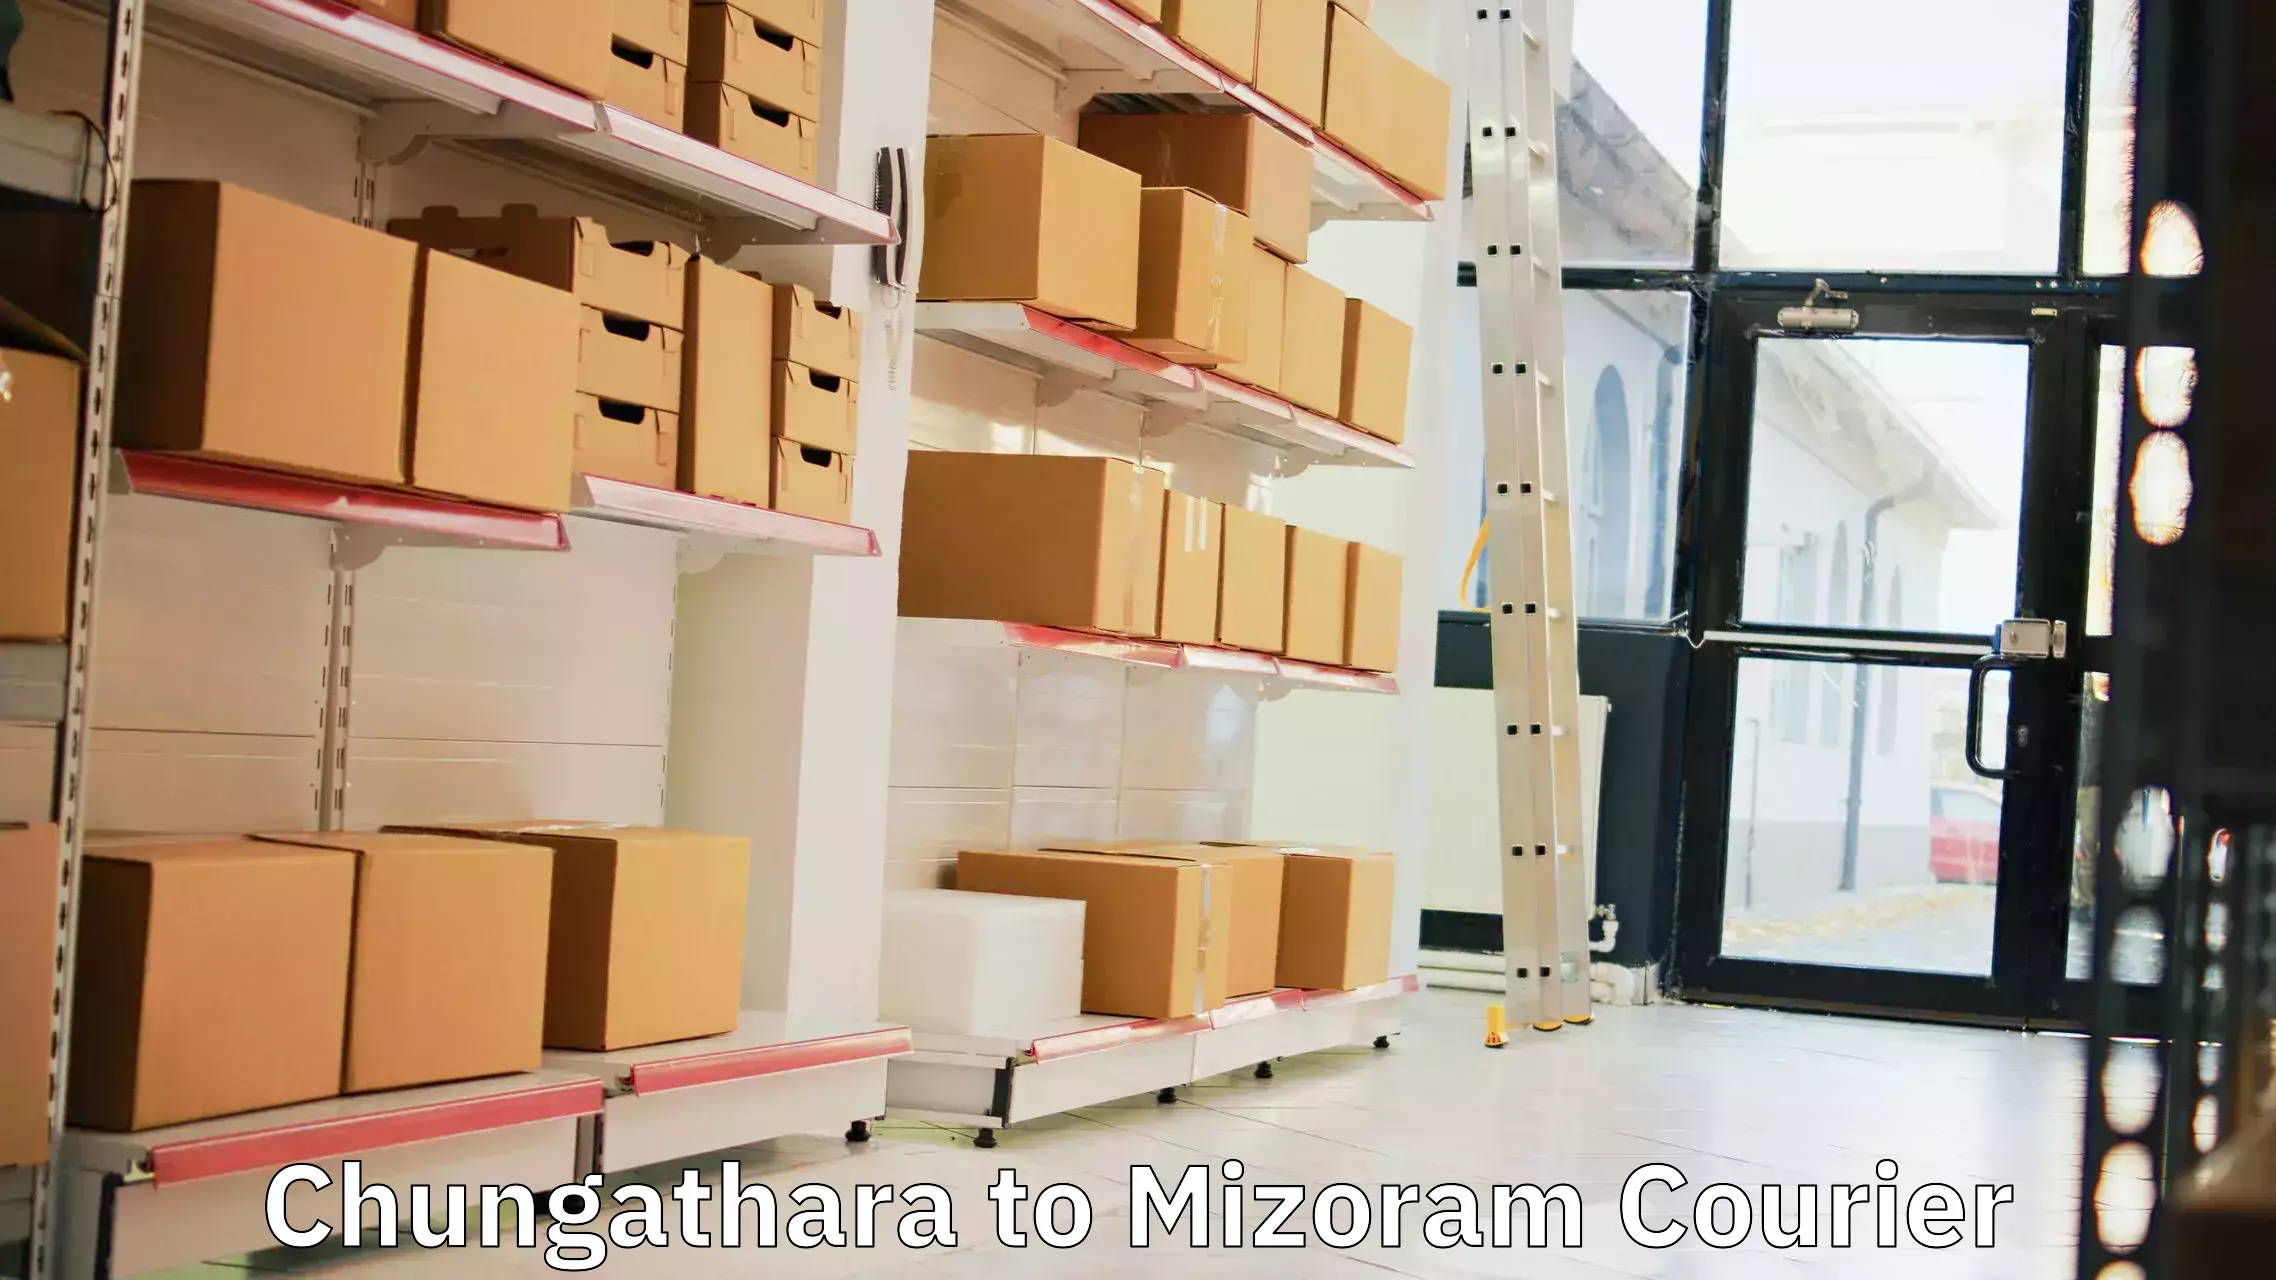 State-of-the-art courier technology Chungathara to Siaha